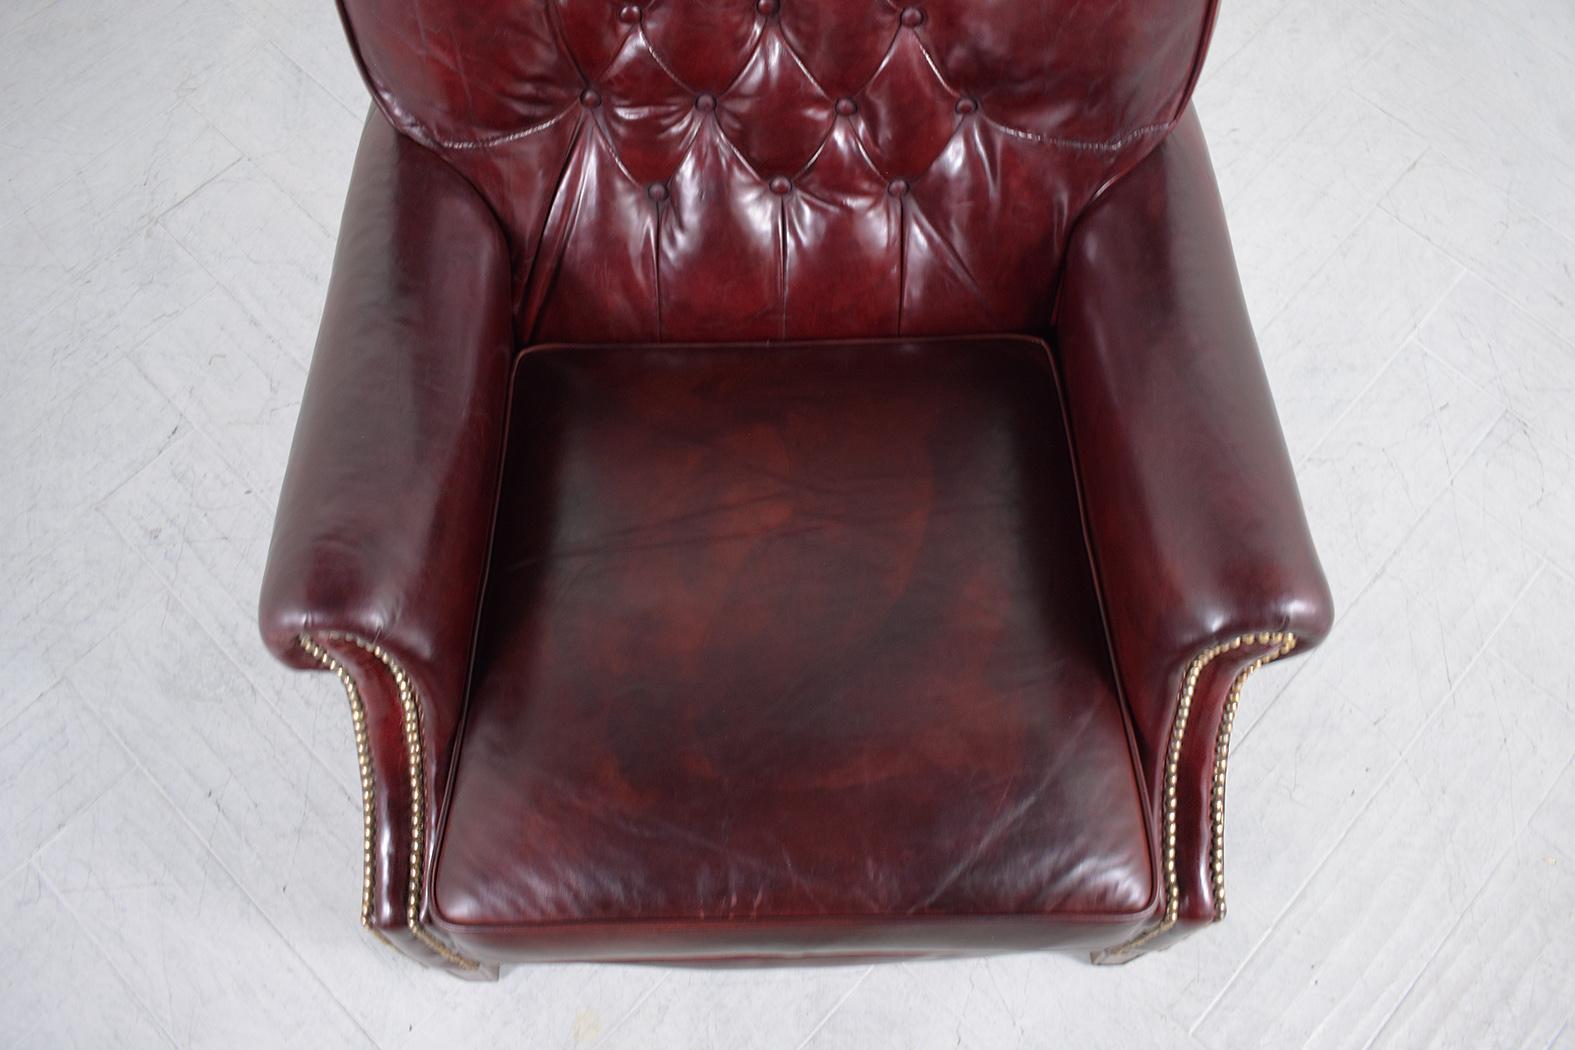 Antique English Chesterfield Lounge Chair: Cordovan Red Leather Tufted Design For Sale 1